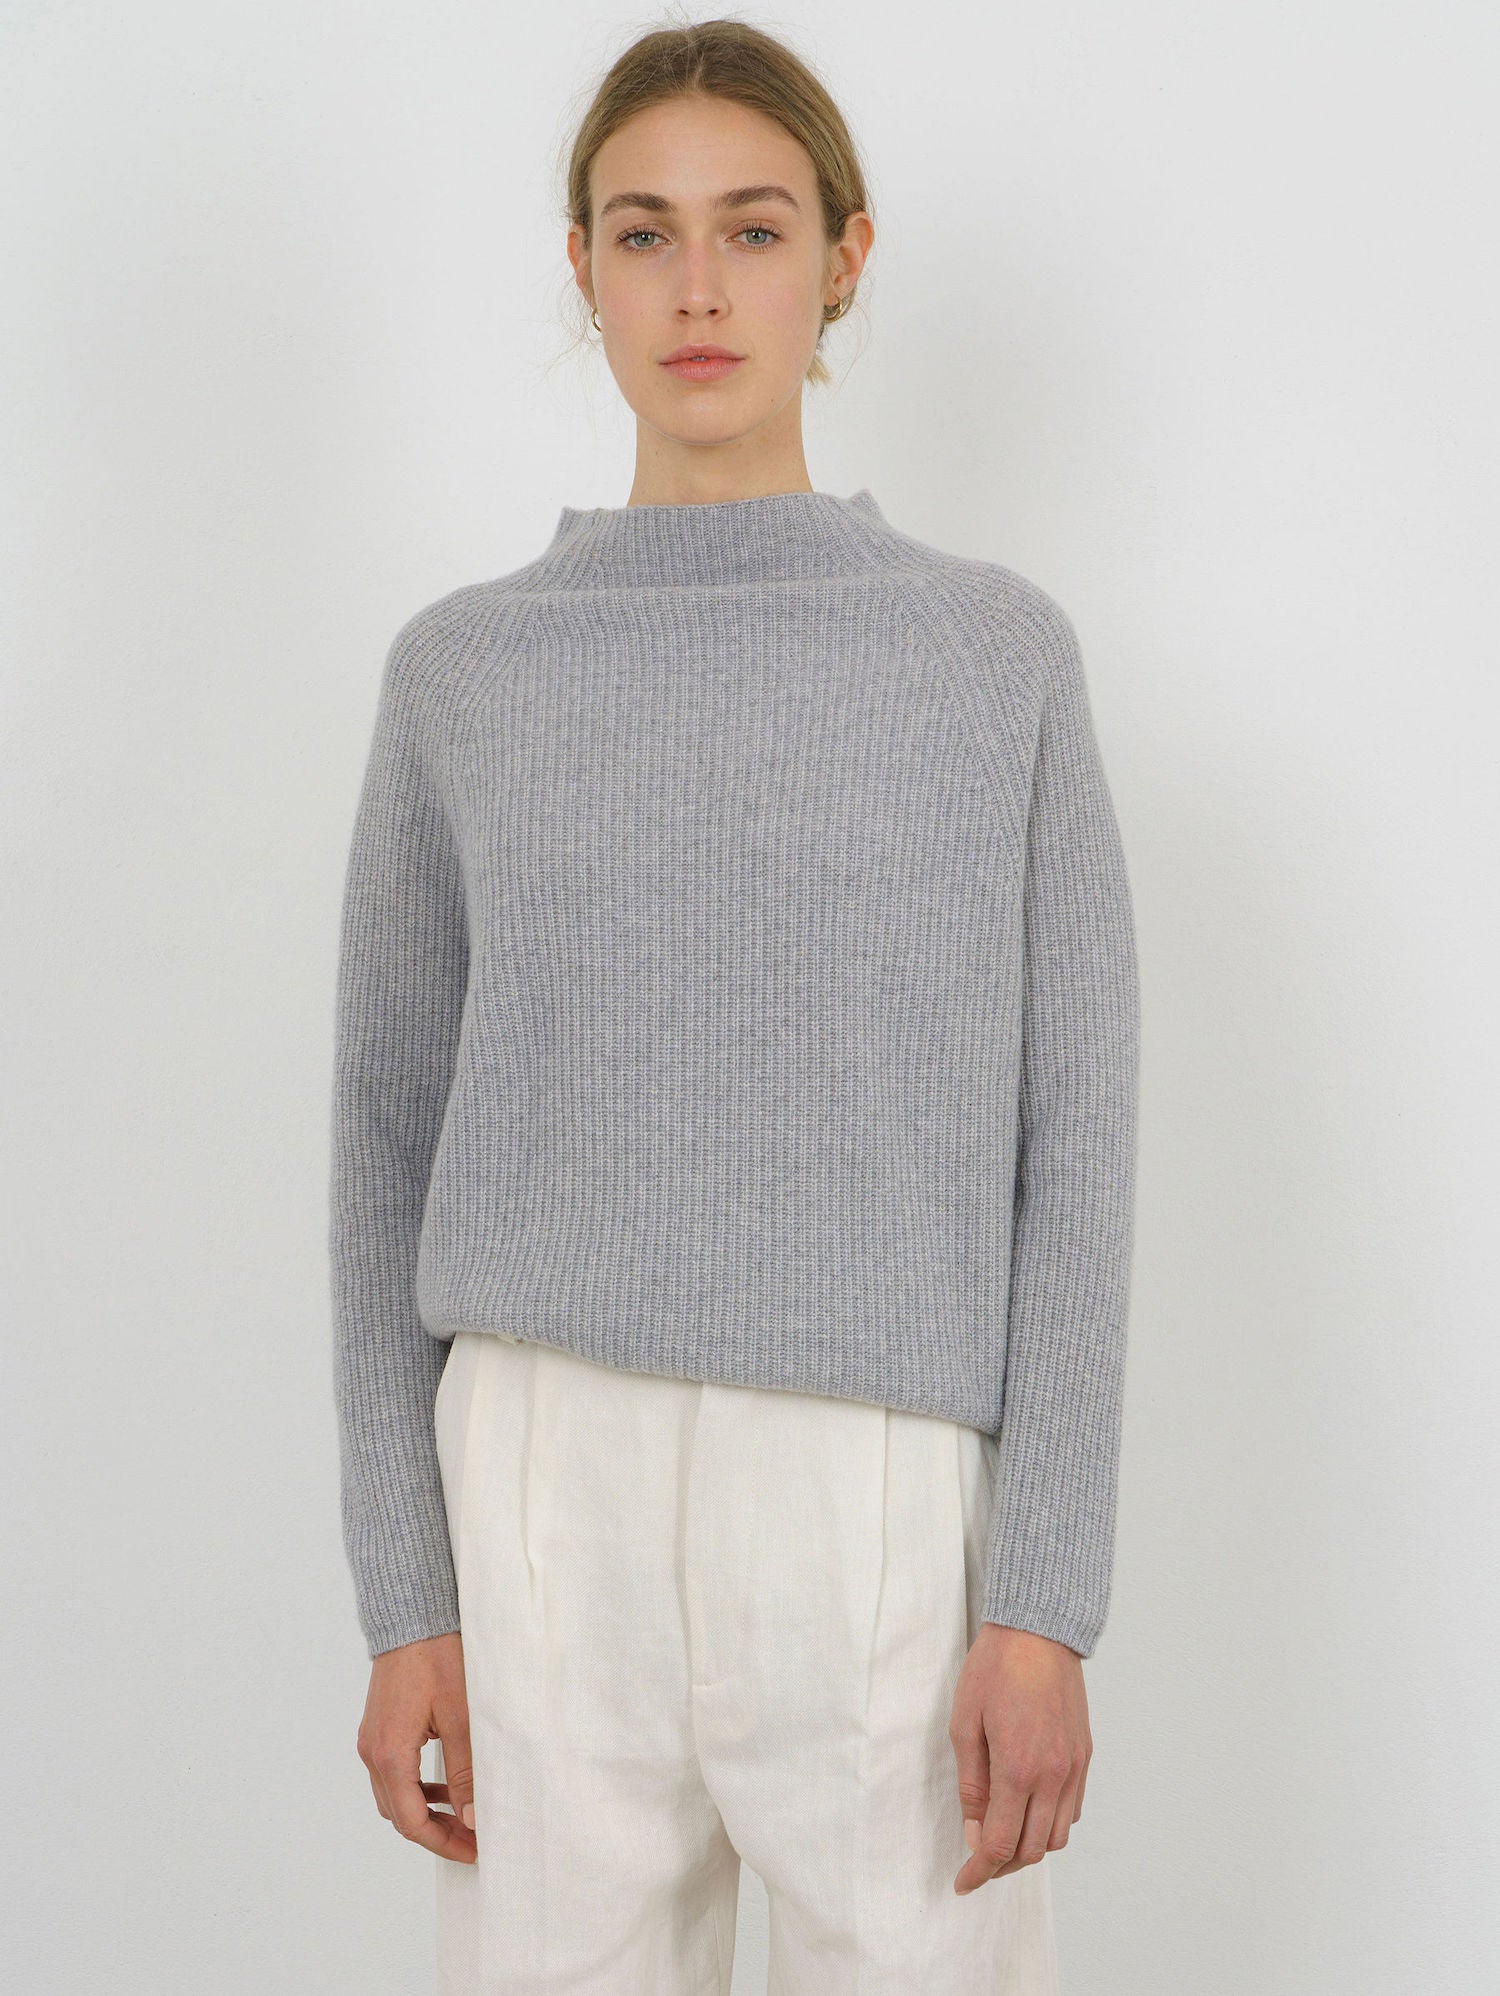 MANON SWEATER IN OYSTER GREY